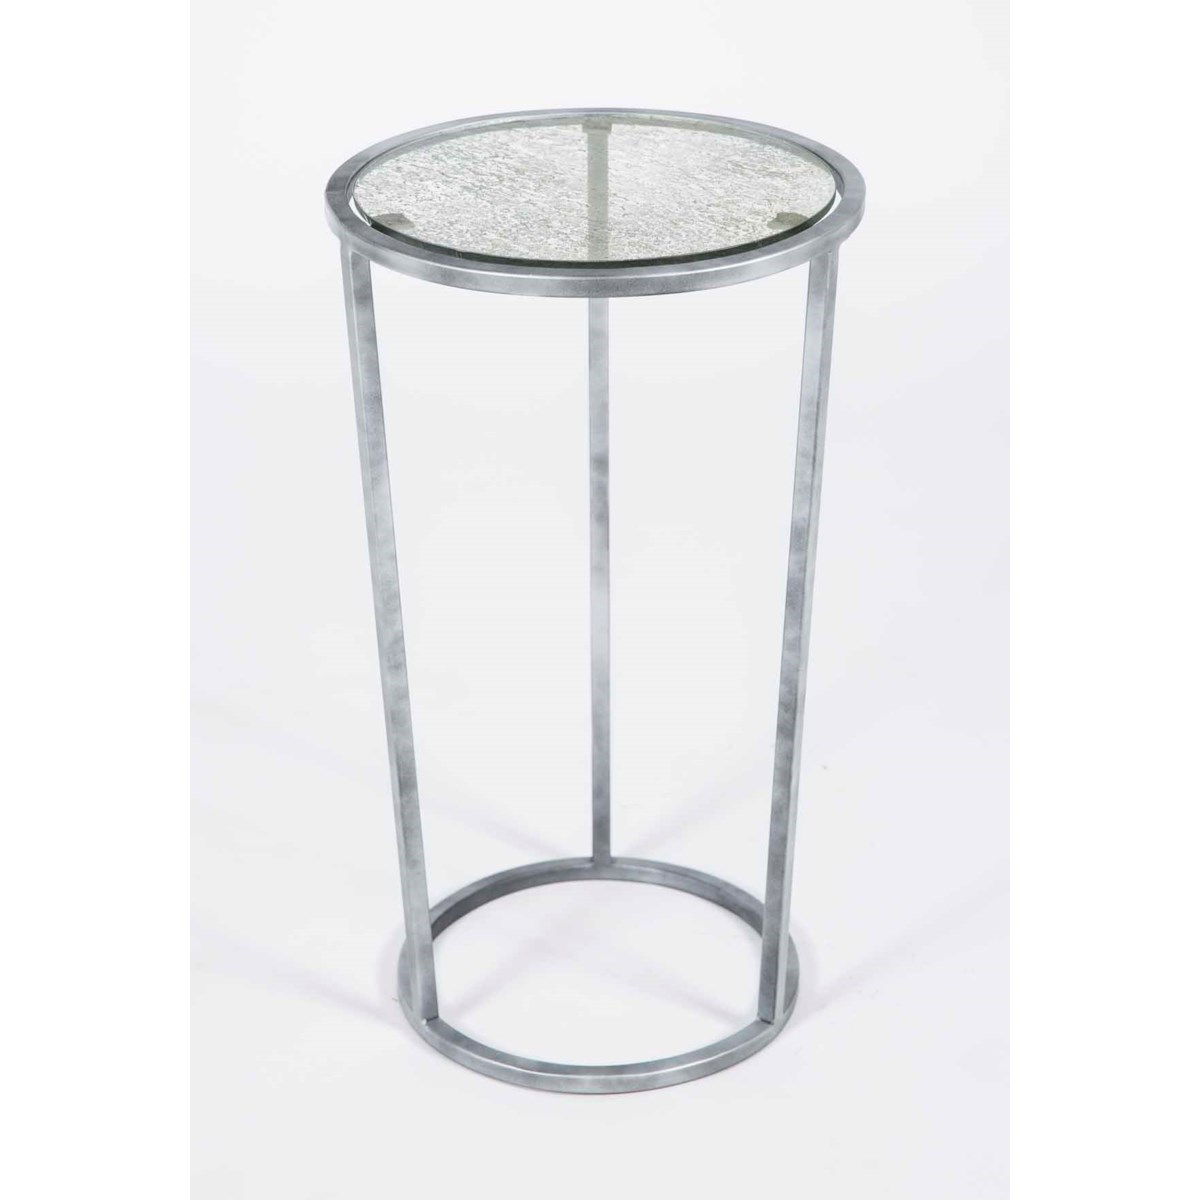 Samuel Accent Table in Antique Silver with Glass Top in Frosted Sky Finish